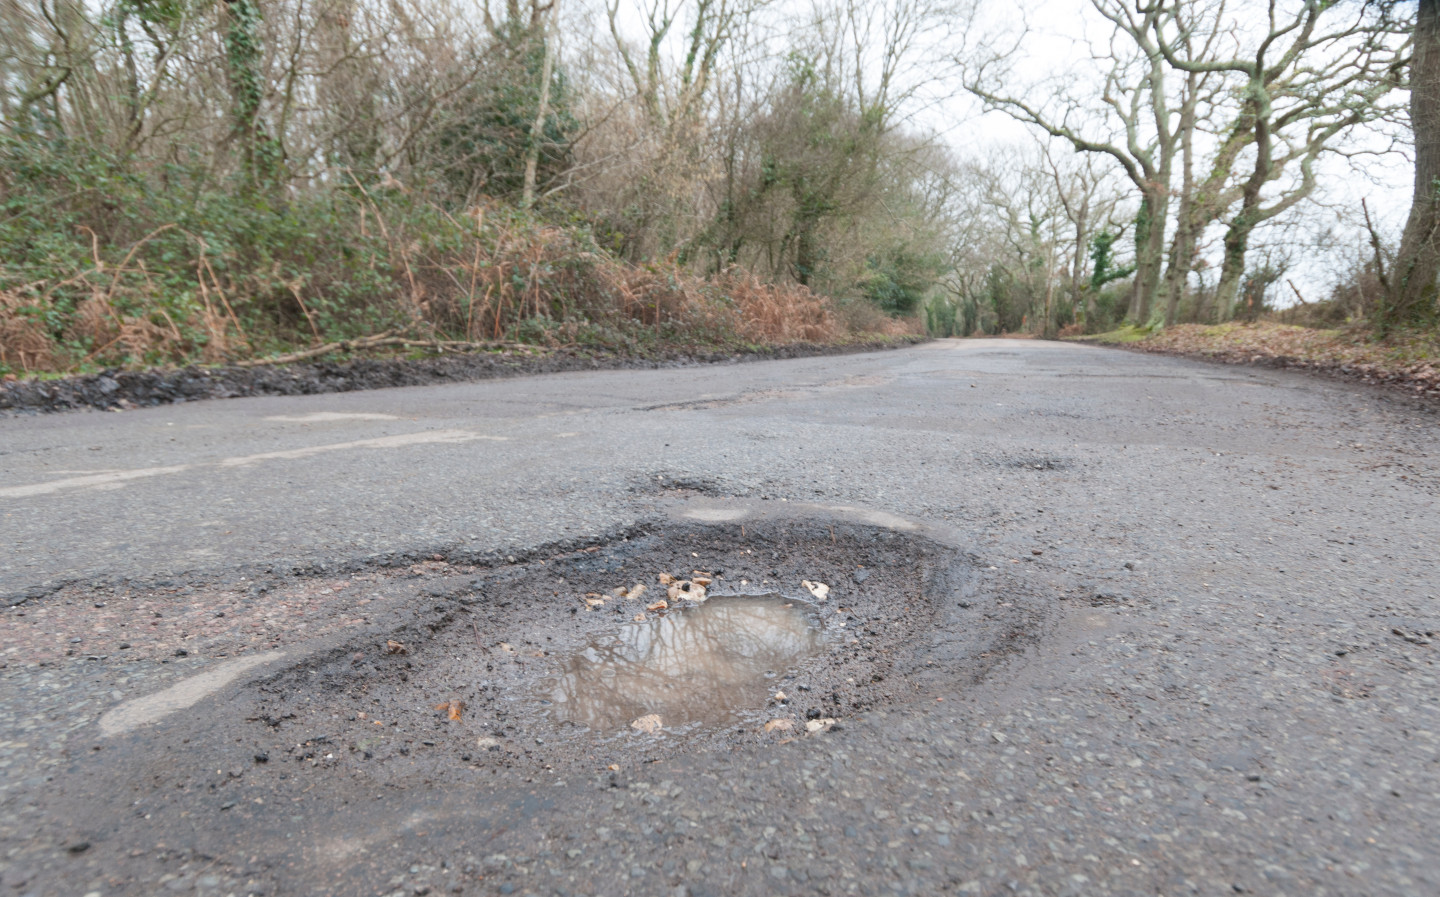 Pothole-related breakdowns increase due to winter storms